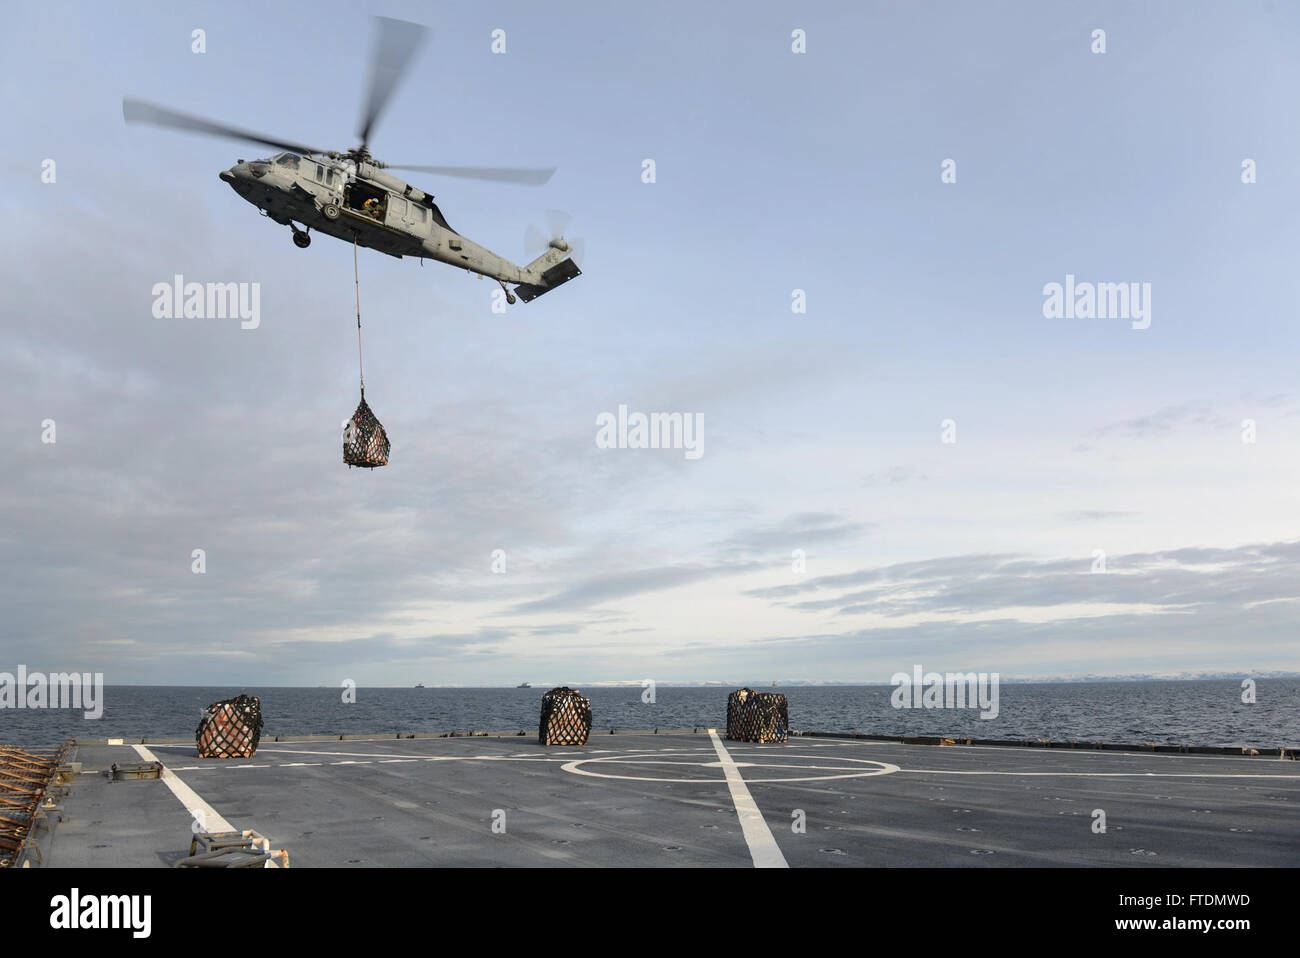 160229-N-QJ850-524 NORTH SEA (Feb. 29, 2016)An SH-60 Sea Hawk performs a vertical replenishment (VERTREP) aboard the Whidbey Island-class dock landing ship USS Fort McHenry (LSD 43) in Trondheim, Norway. Fort McHenry is participating in Exercise Cold Response 2016, a Norwegian invitational, NATO Military Training and Exercise Program (MTEP), Article 4 live exercise with invitations to all NATO and select Partnership for Peace nations that will involve approximately 16,000 troops from 12 countries. (U.S. Navy photo by Mass Communication Specialist 3rd Class Andrew Murray/Released) Stock Photo